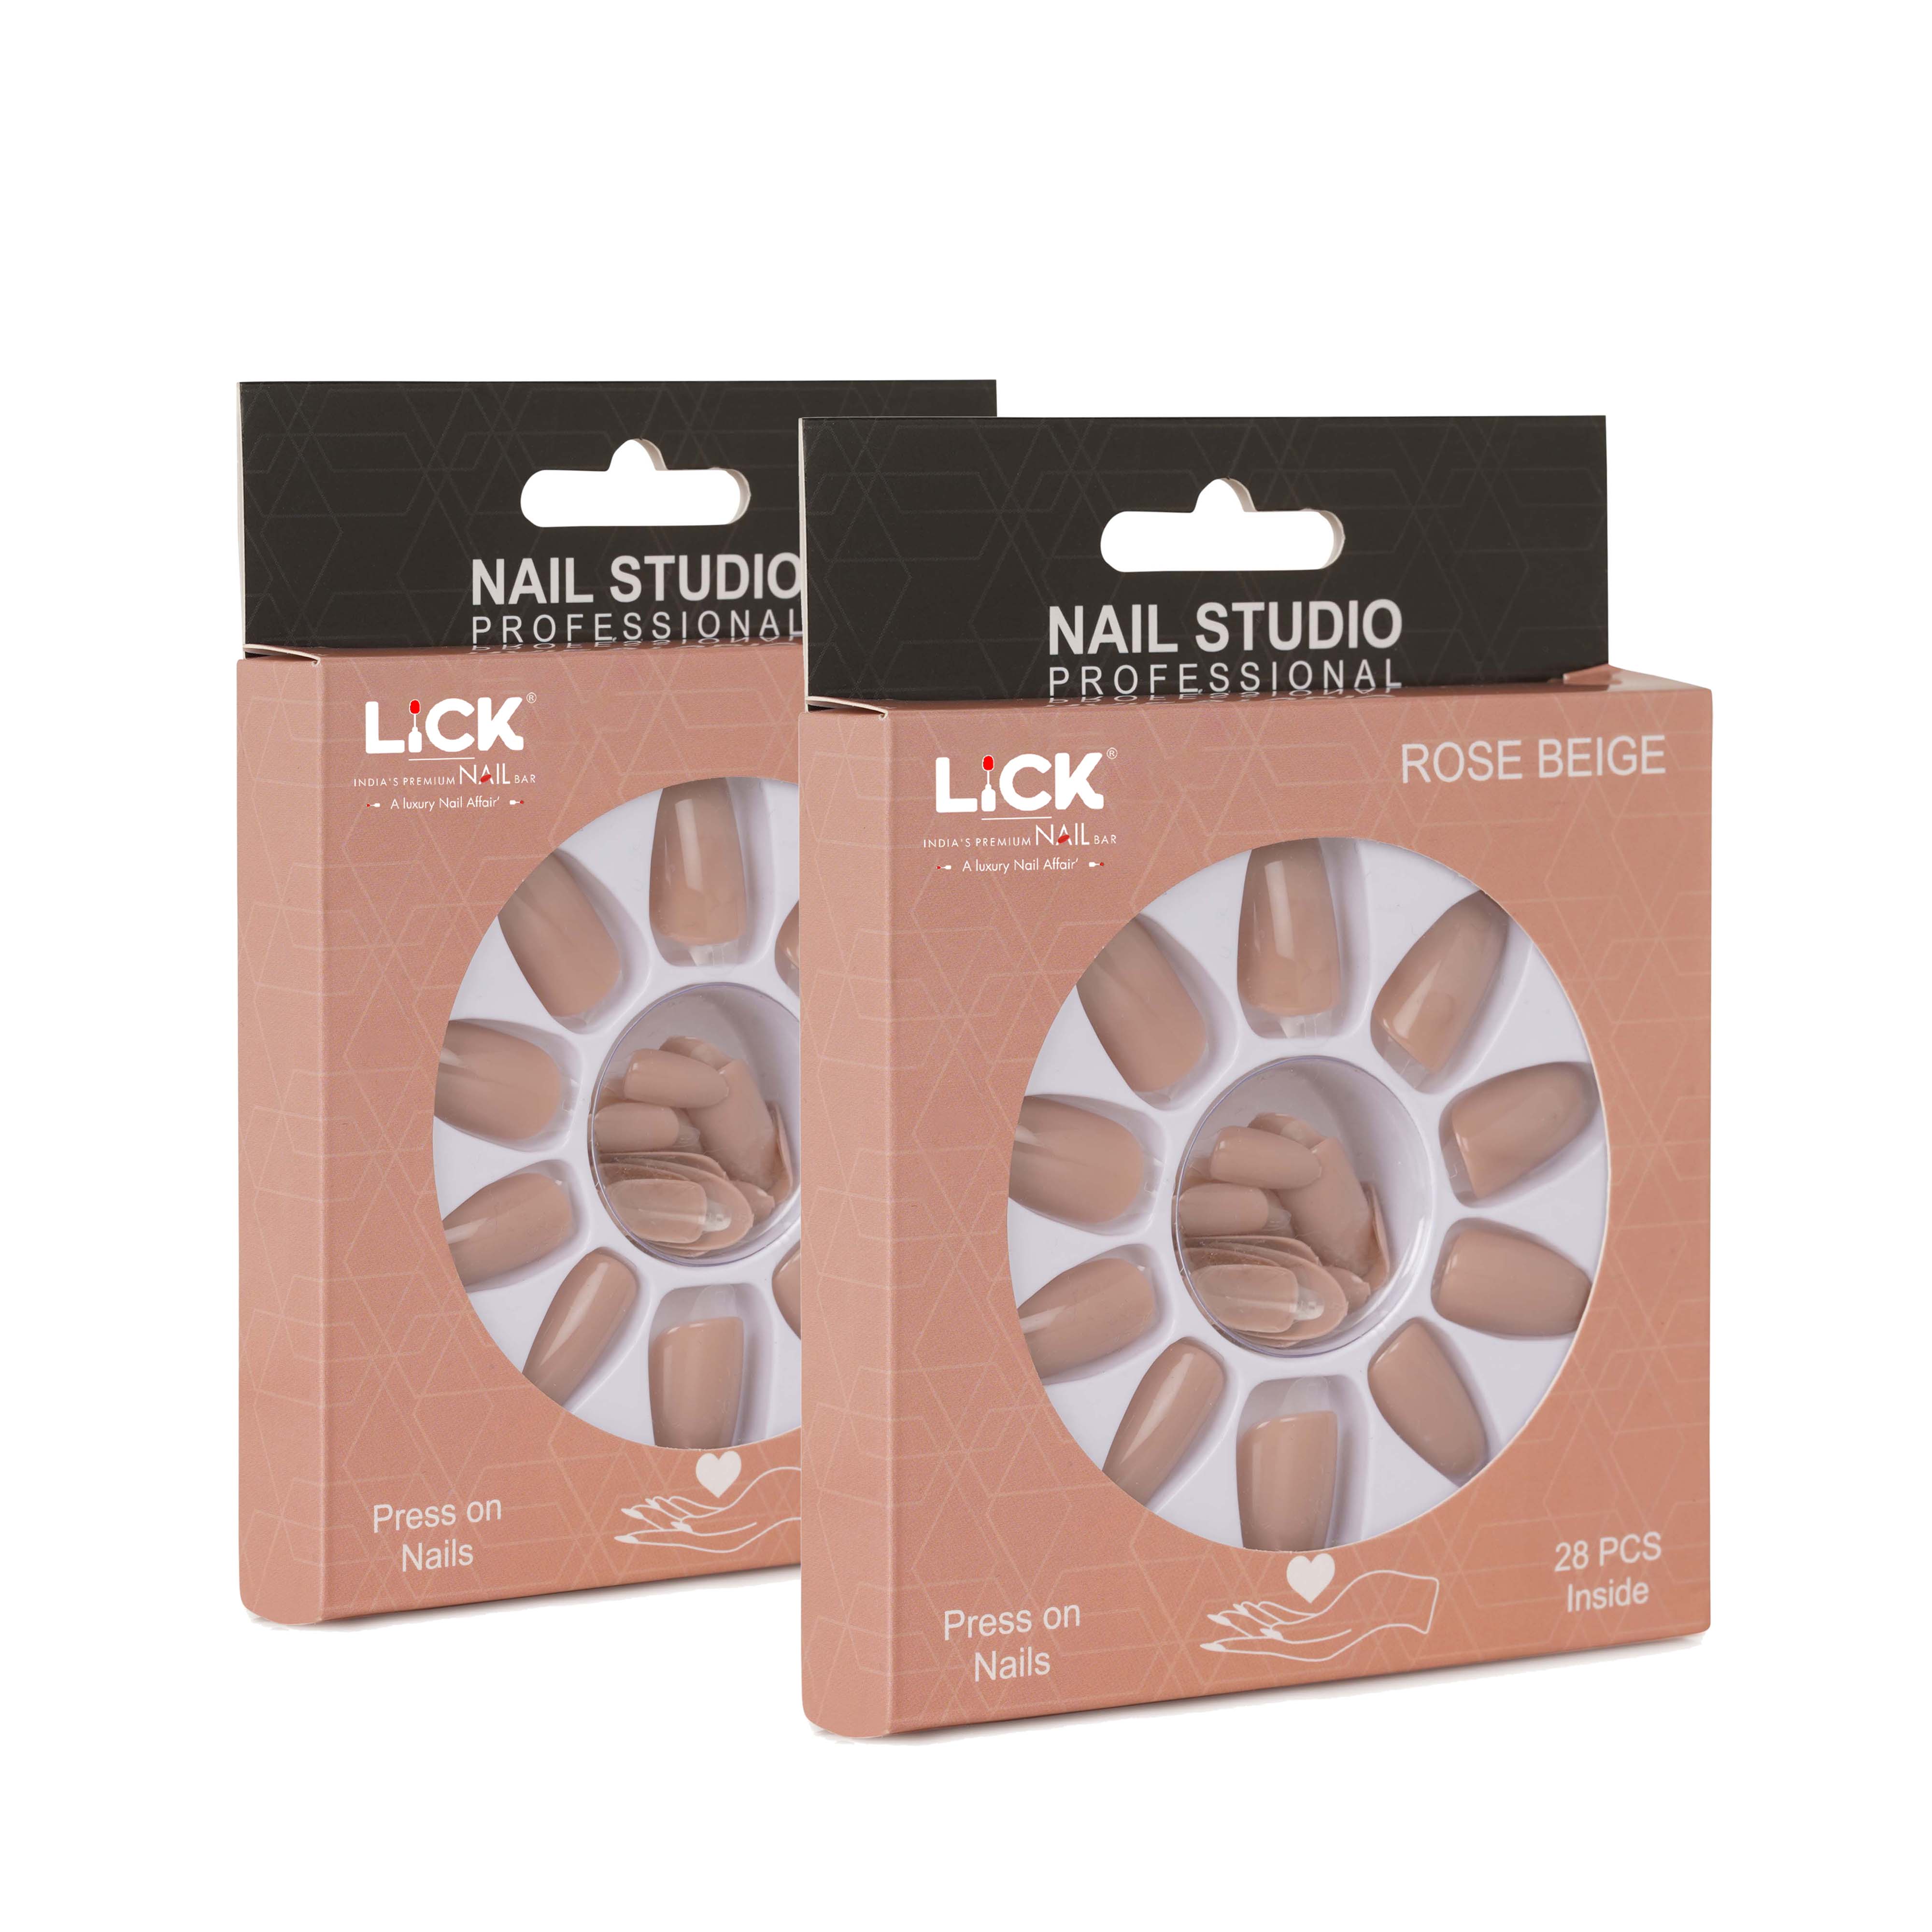 Lick Nails Rose Beige Acrylic Reusable Press on Nails With Application Kit, Combo of 2, 28 Pcs Per Pack